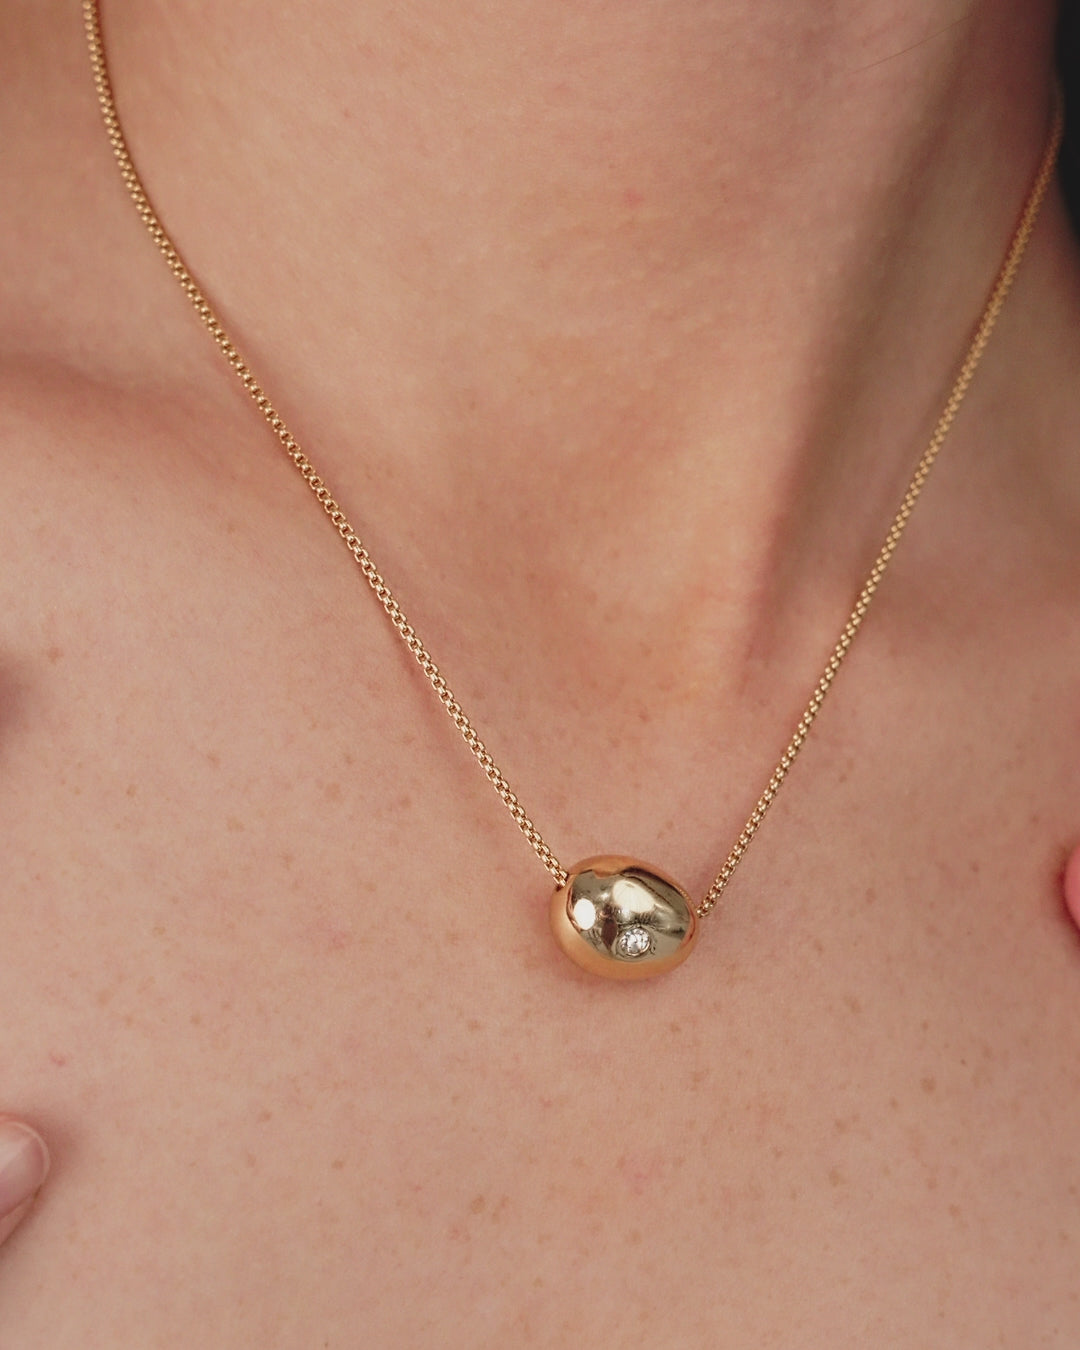 Crystal Dot Pebble Pendant Necklace on model in video